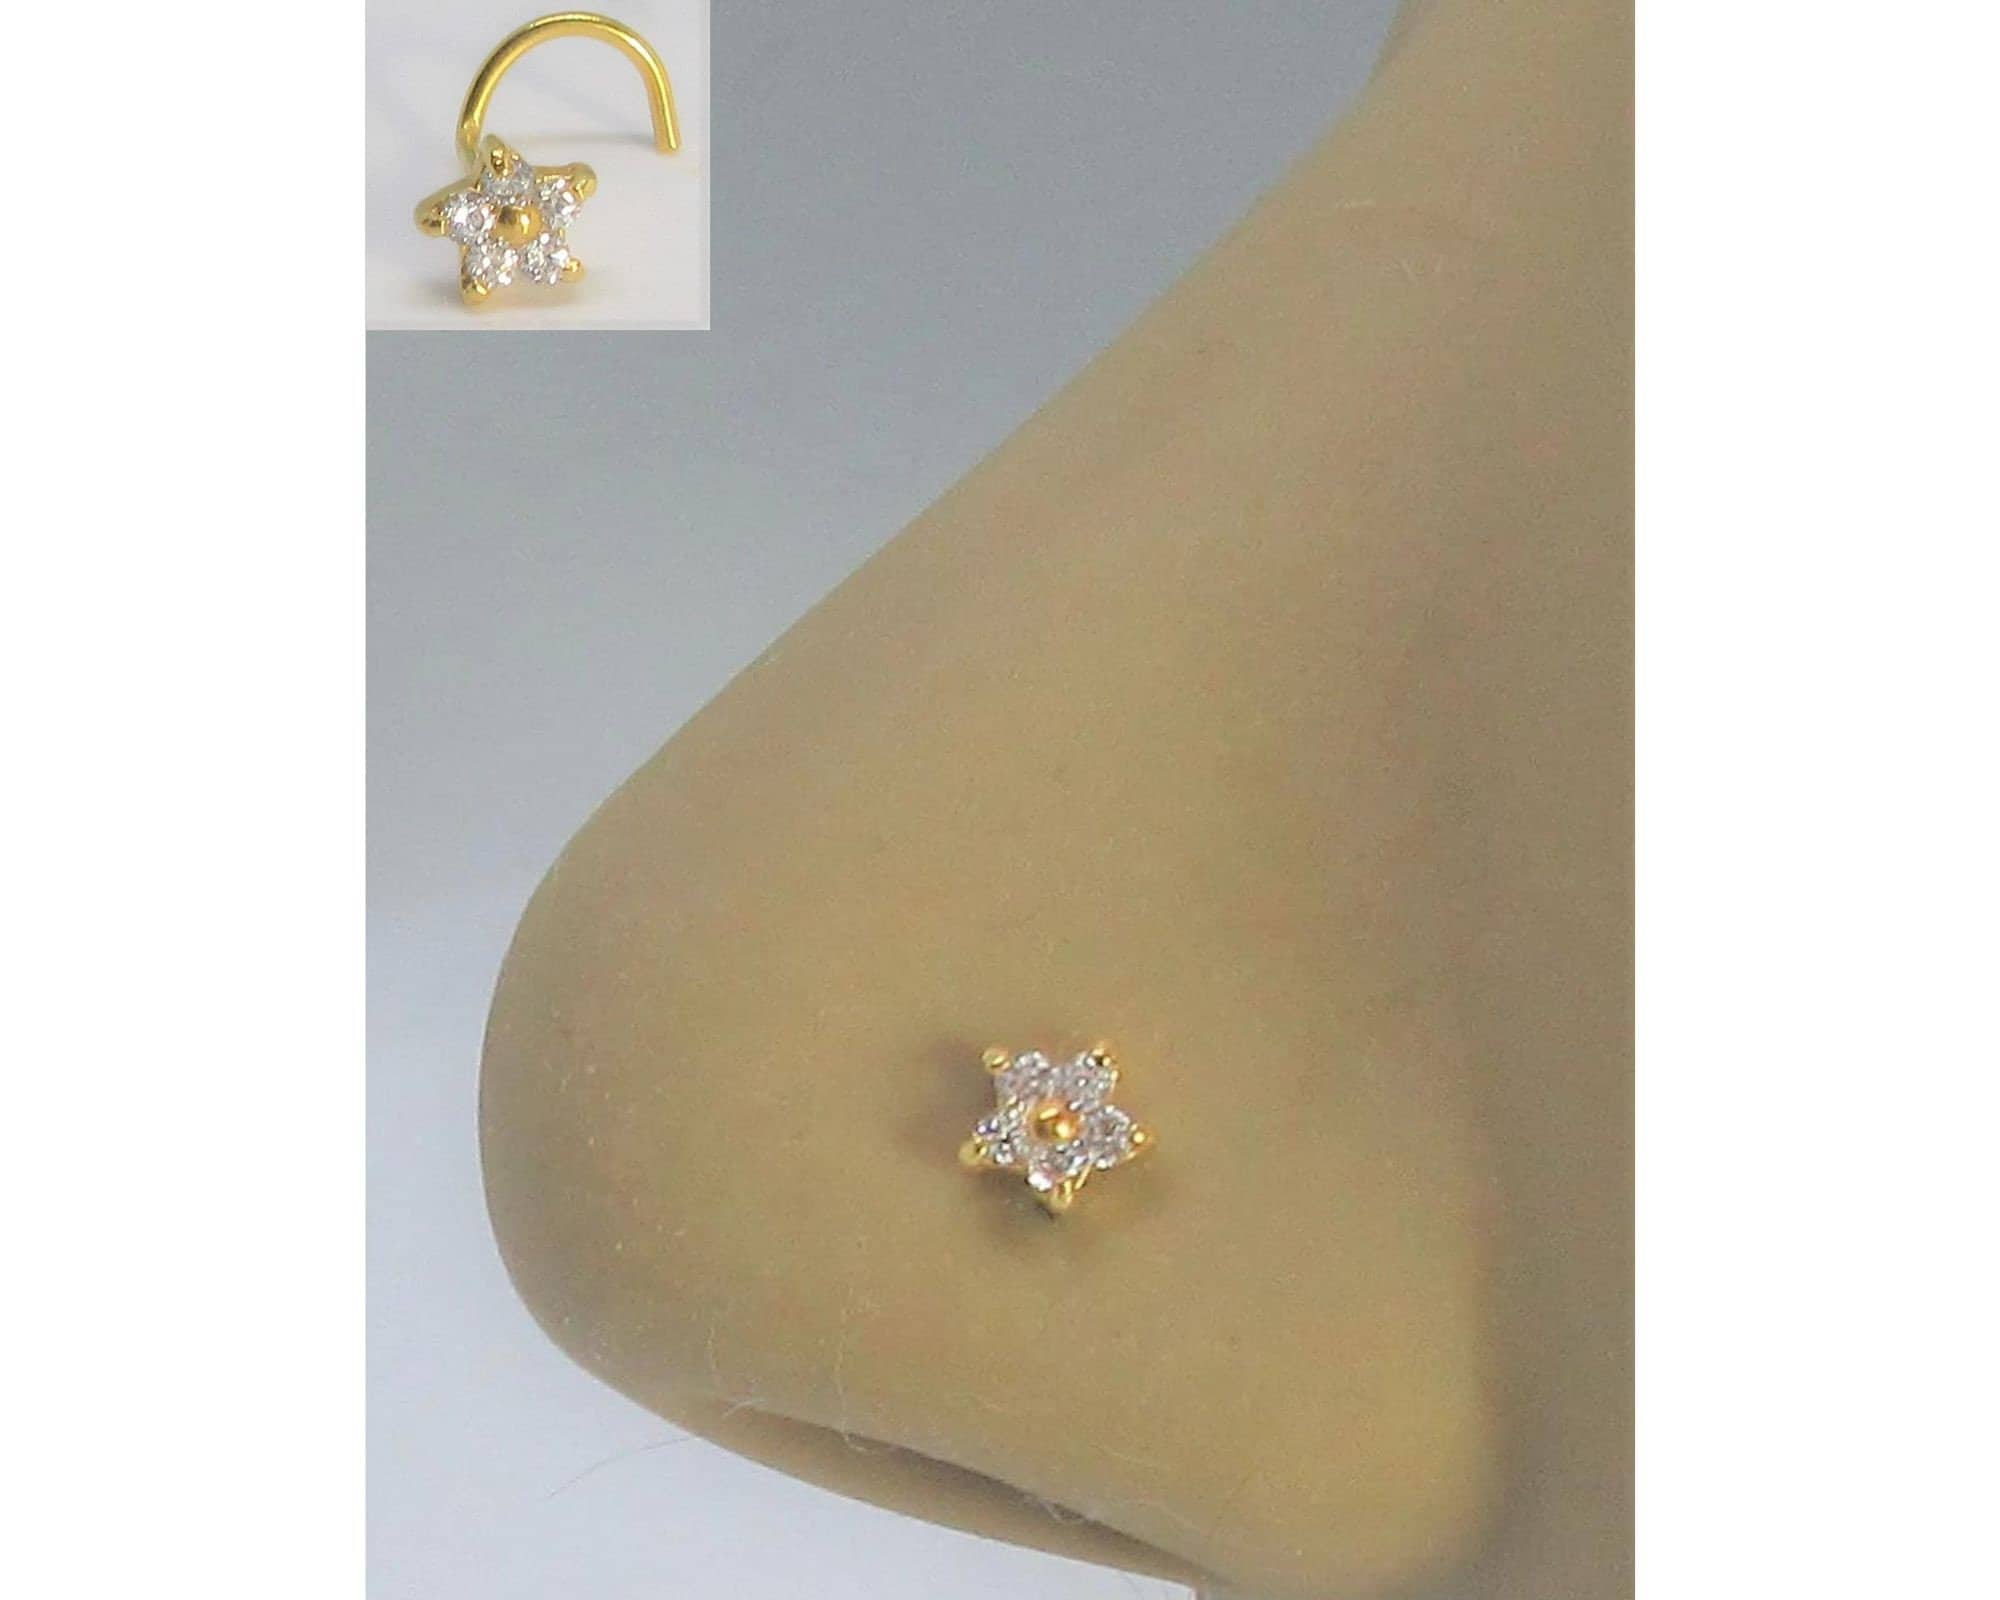 Diamond Flower 14K Gold Nose Ring White / 20g Straight Post Quality Jewelry Made in USA